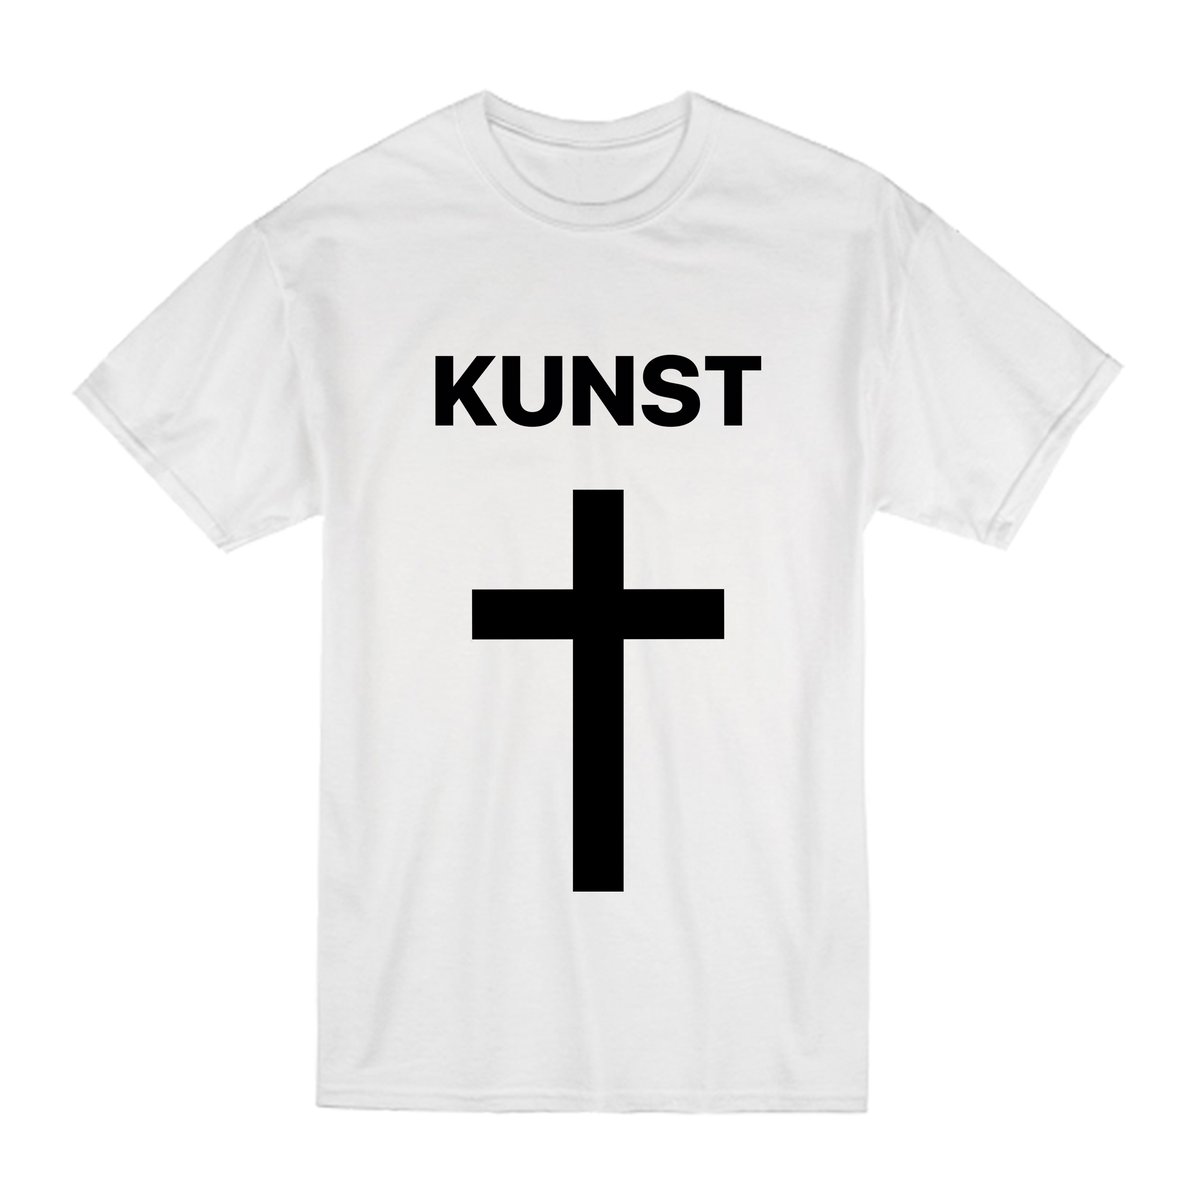 Image of Shirt - KUNST ✝ WEISS